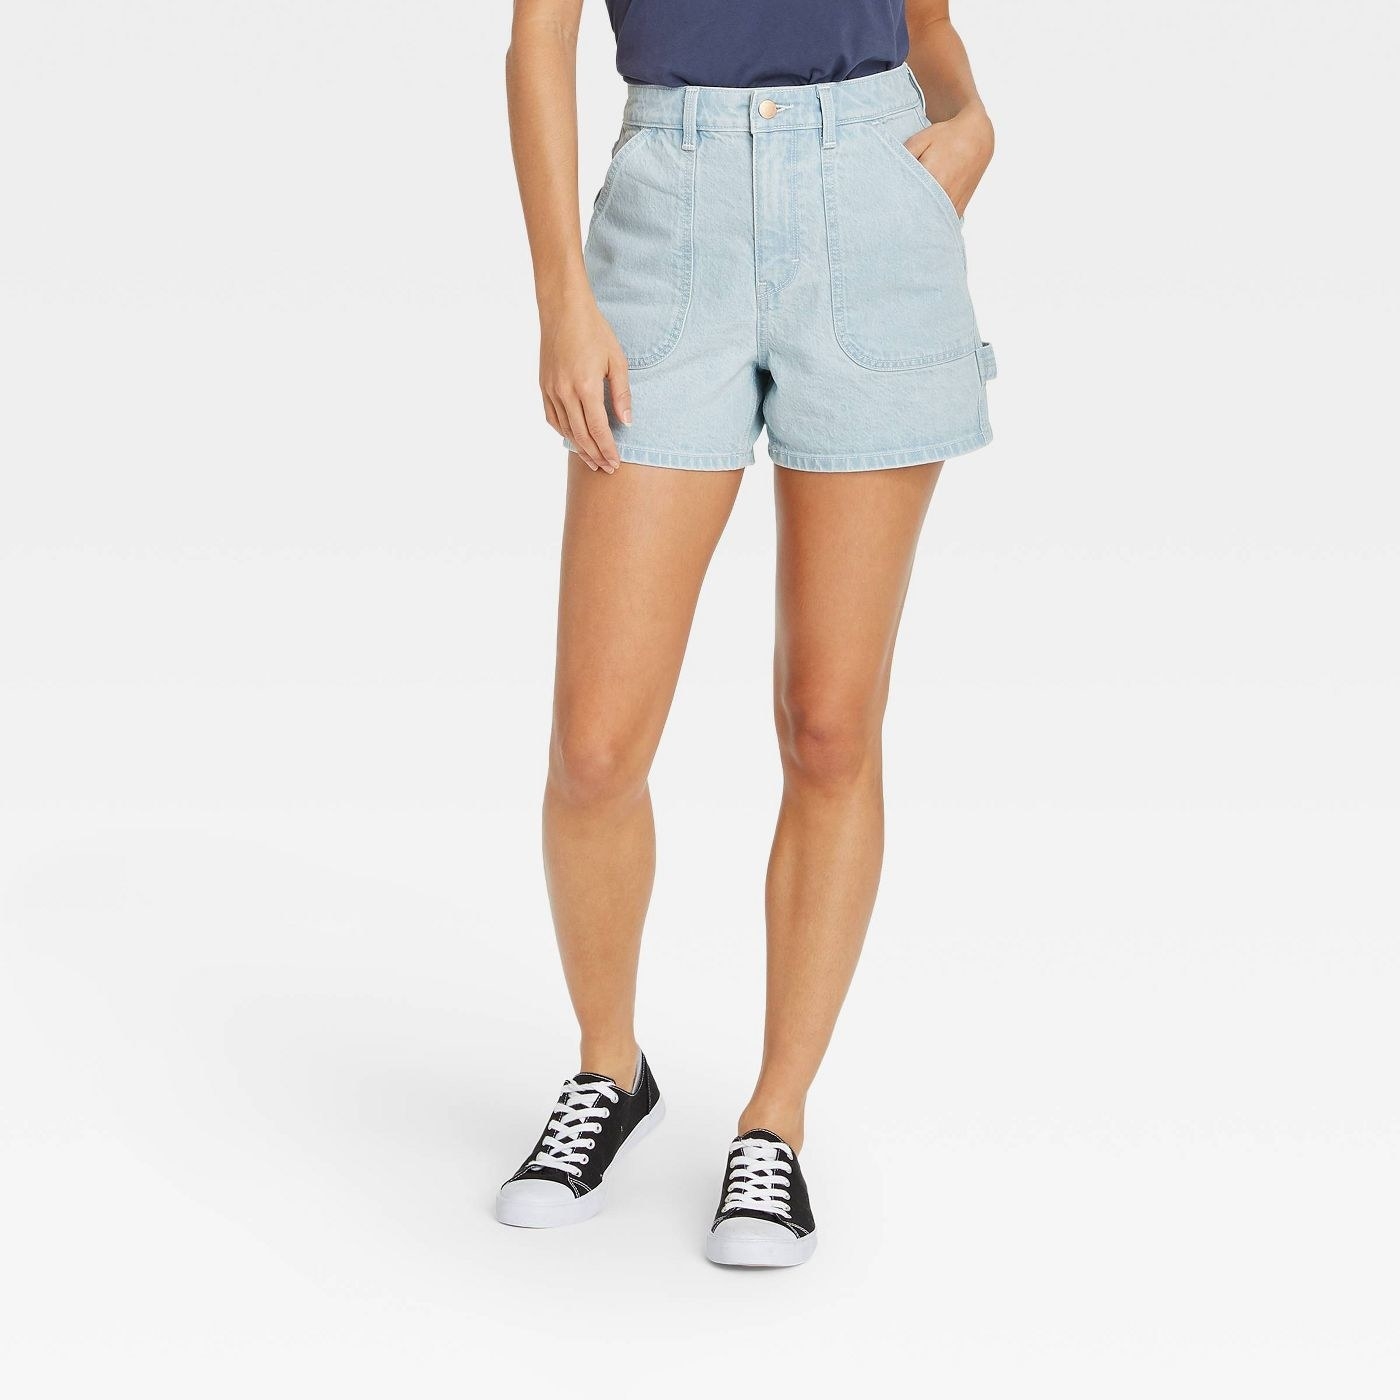 Model wearing light denim shorts with strap on right side 